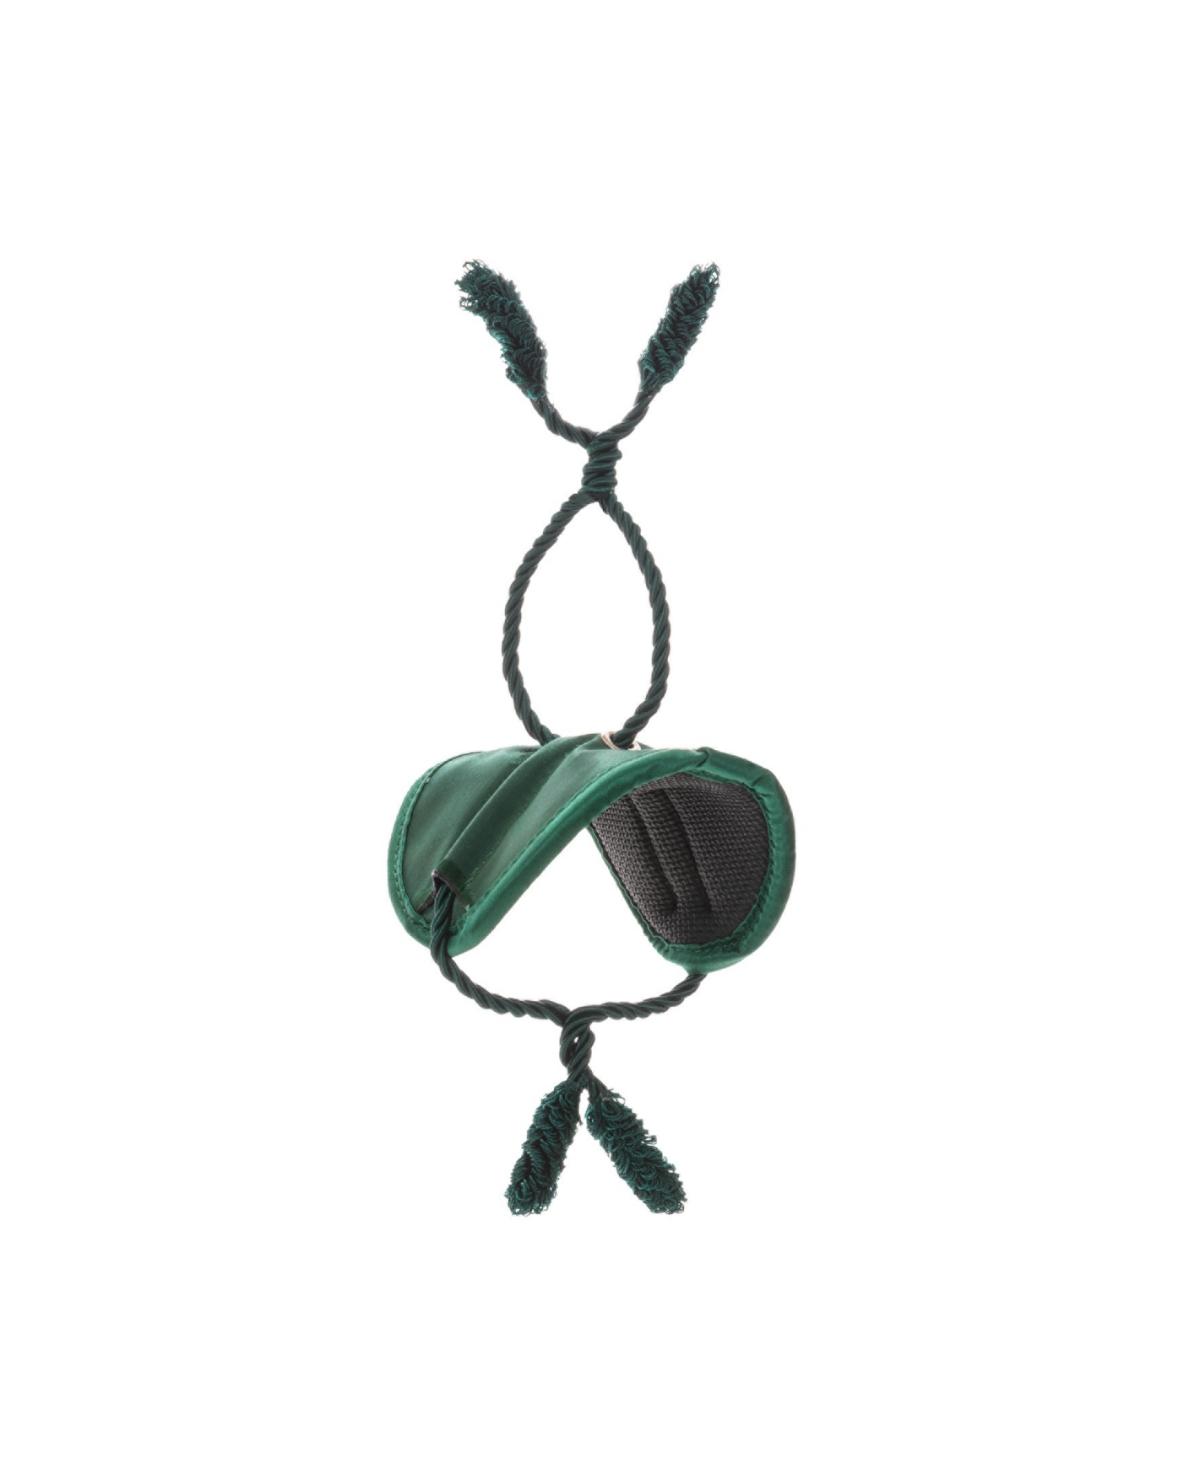 Banister Protecting Garland Ties - 3 Pack - Green